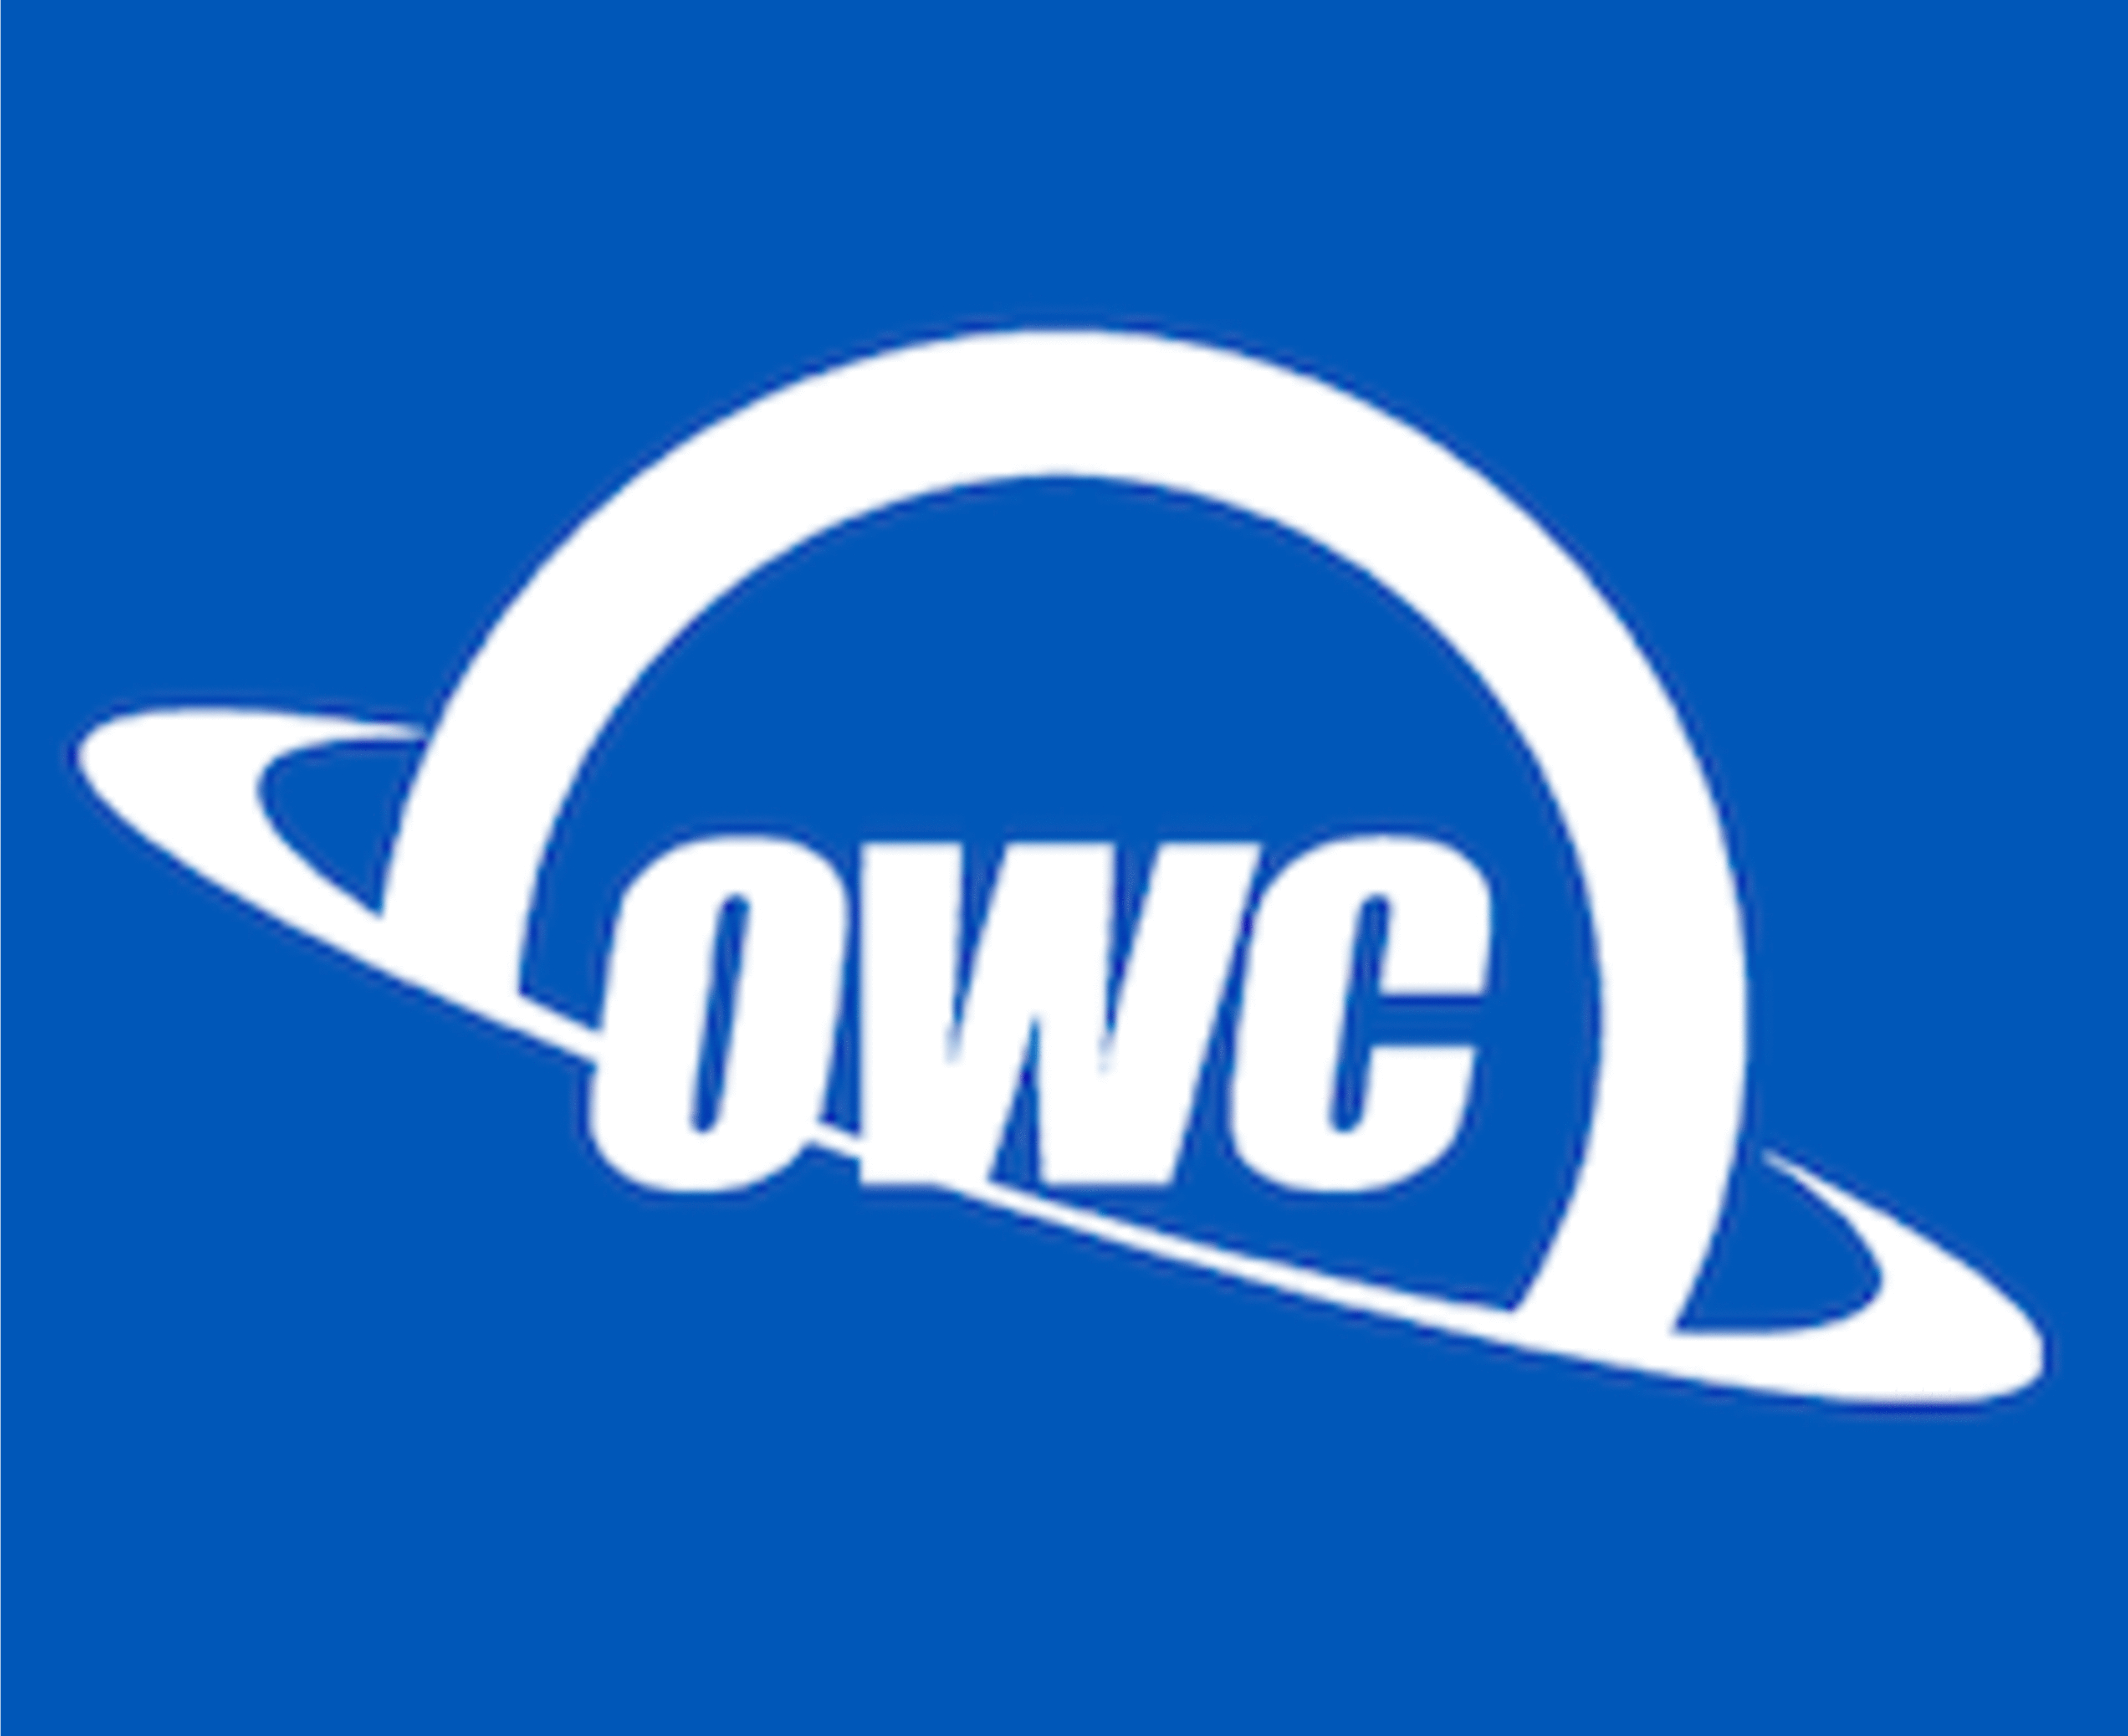 OWC - Other World Computing Code